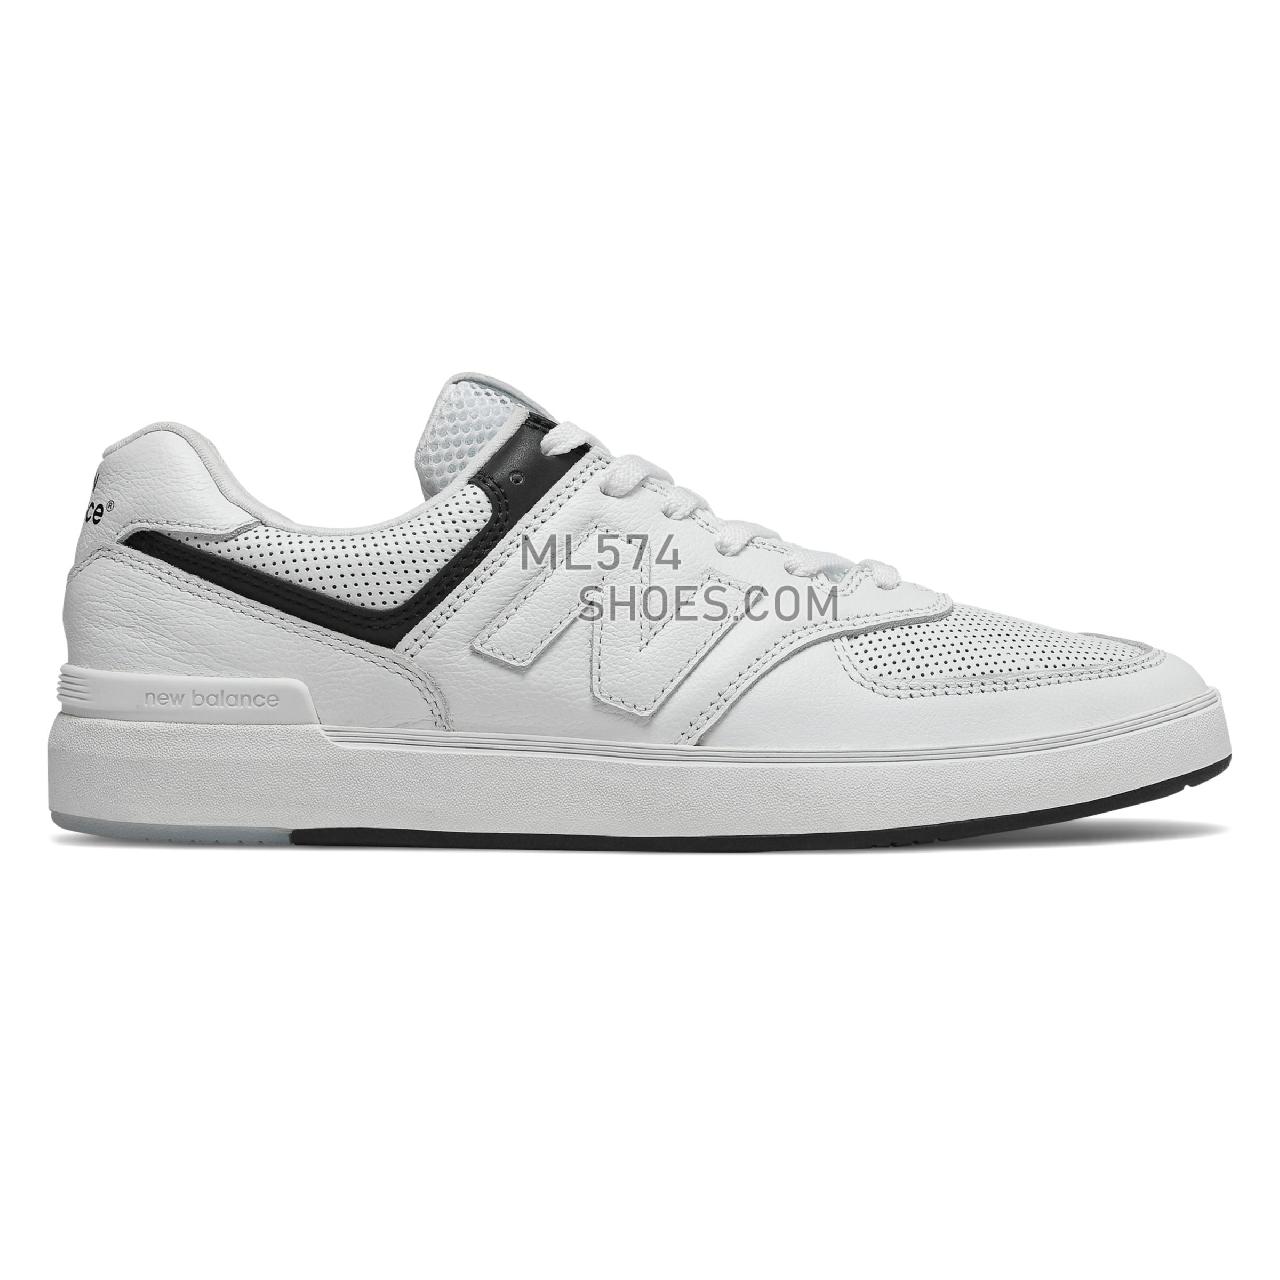 New Balance All Coasts 574 - Men's Court Classics - White with Black - AM574PWG